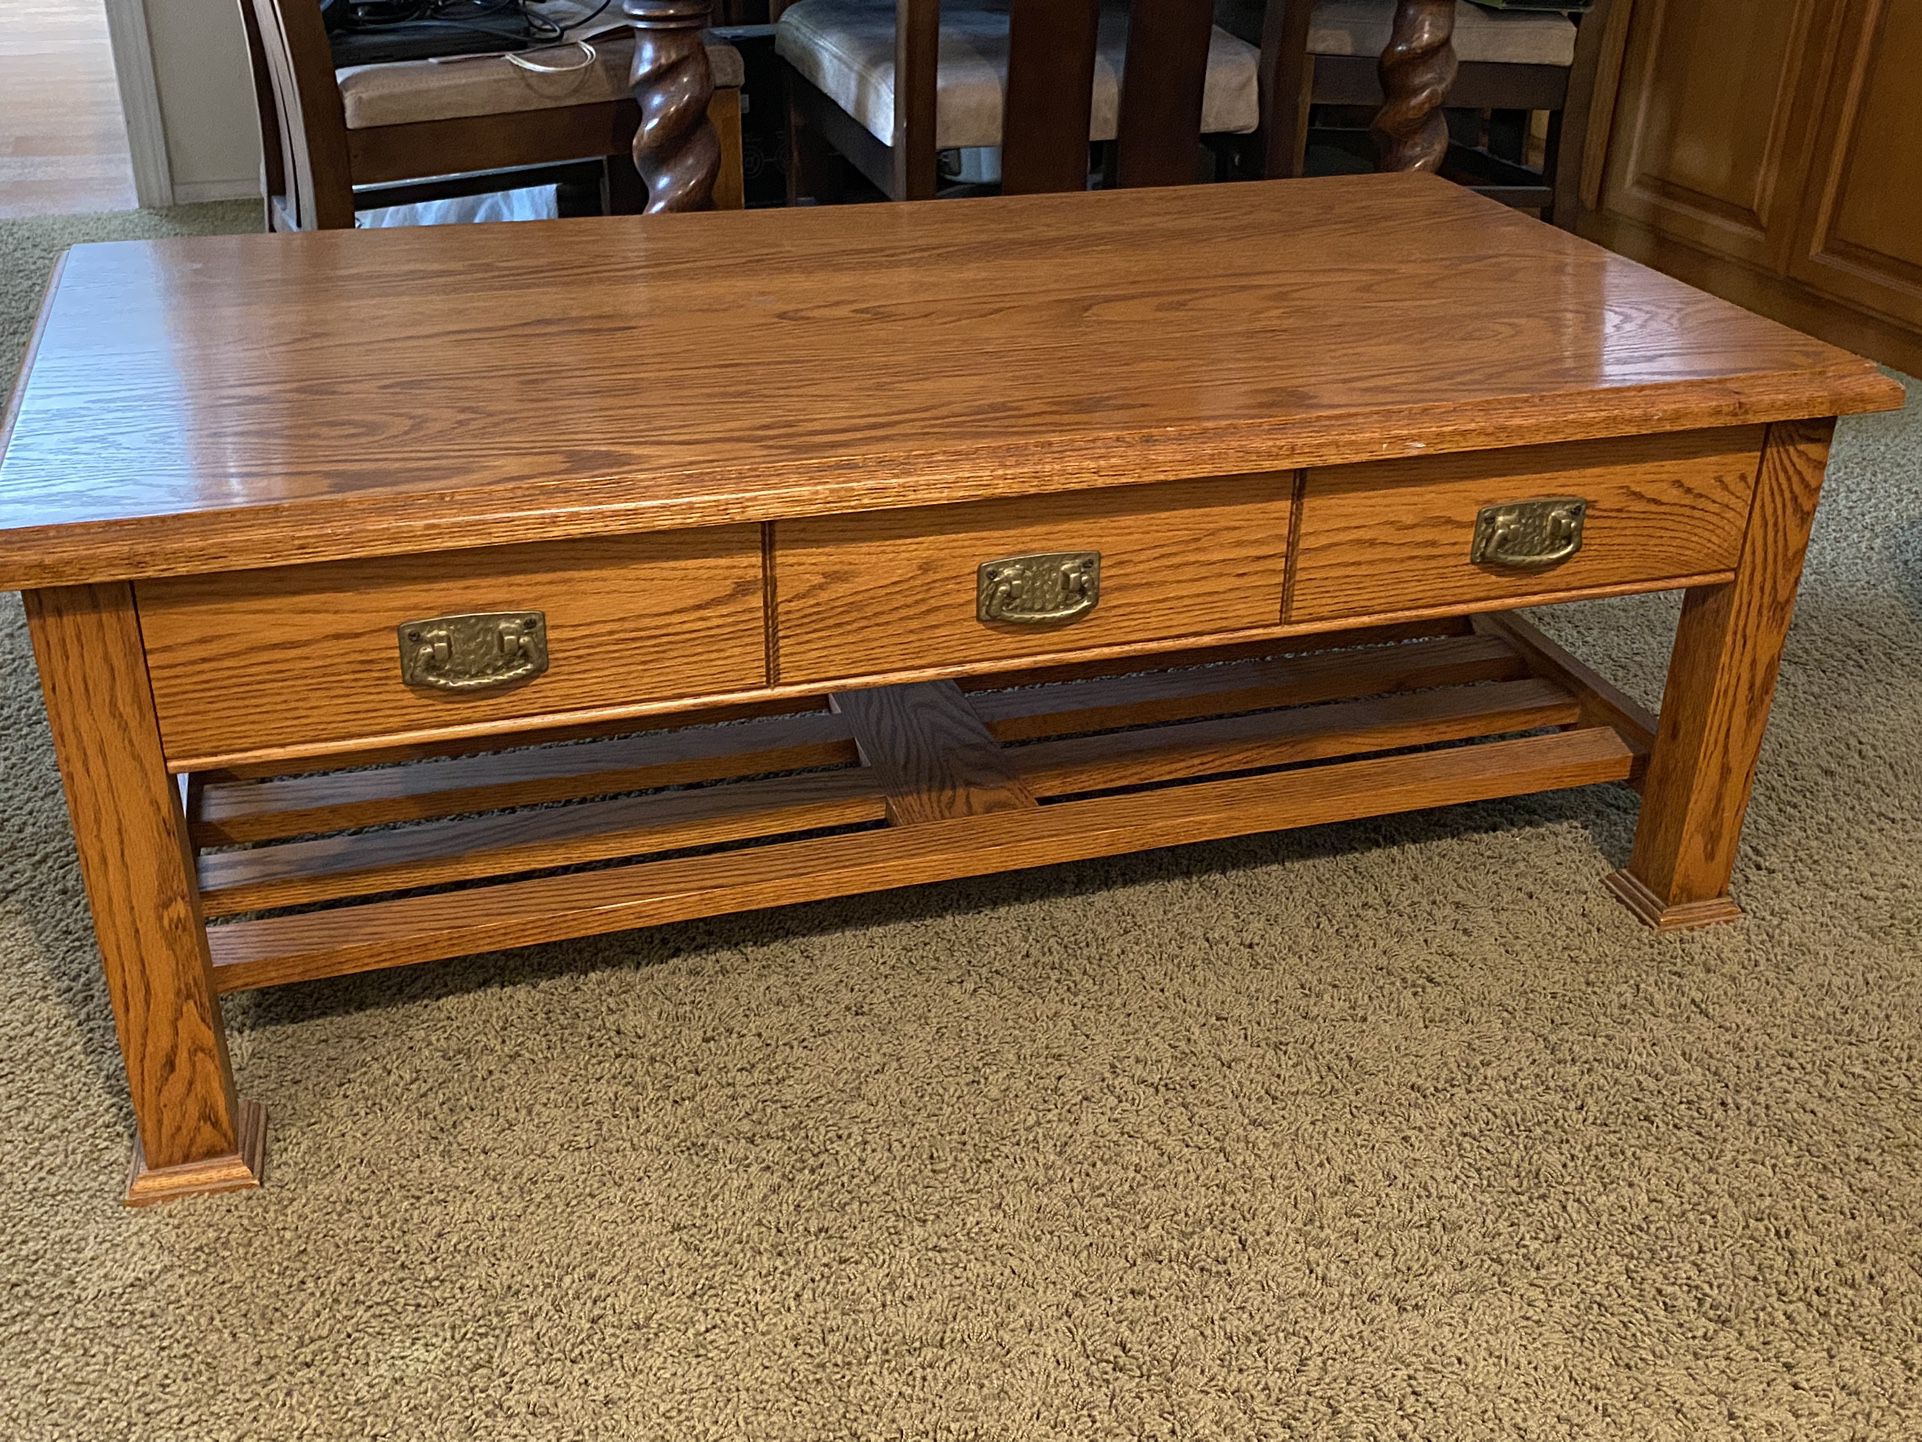 Beautiful Rustic Solid Wood Coffee Table With Large Storage Drawer. Excellent Condition. Home Or Office Use. Rustic Mission Style. See Pics.  $100.00.